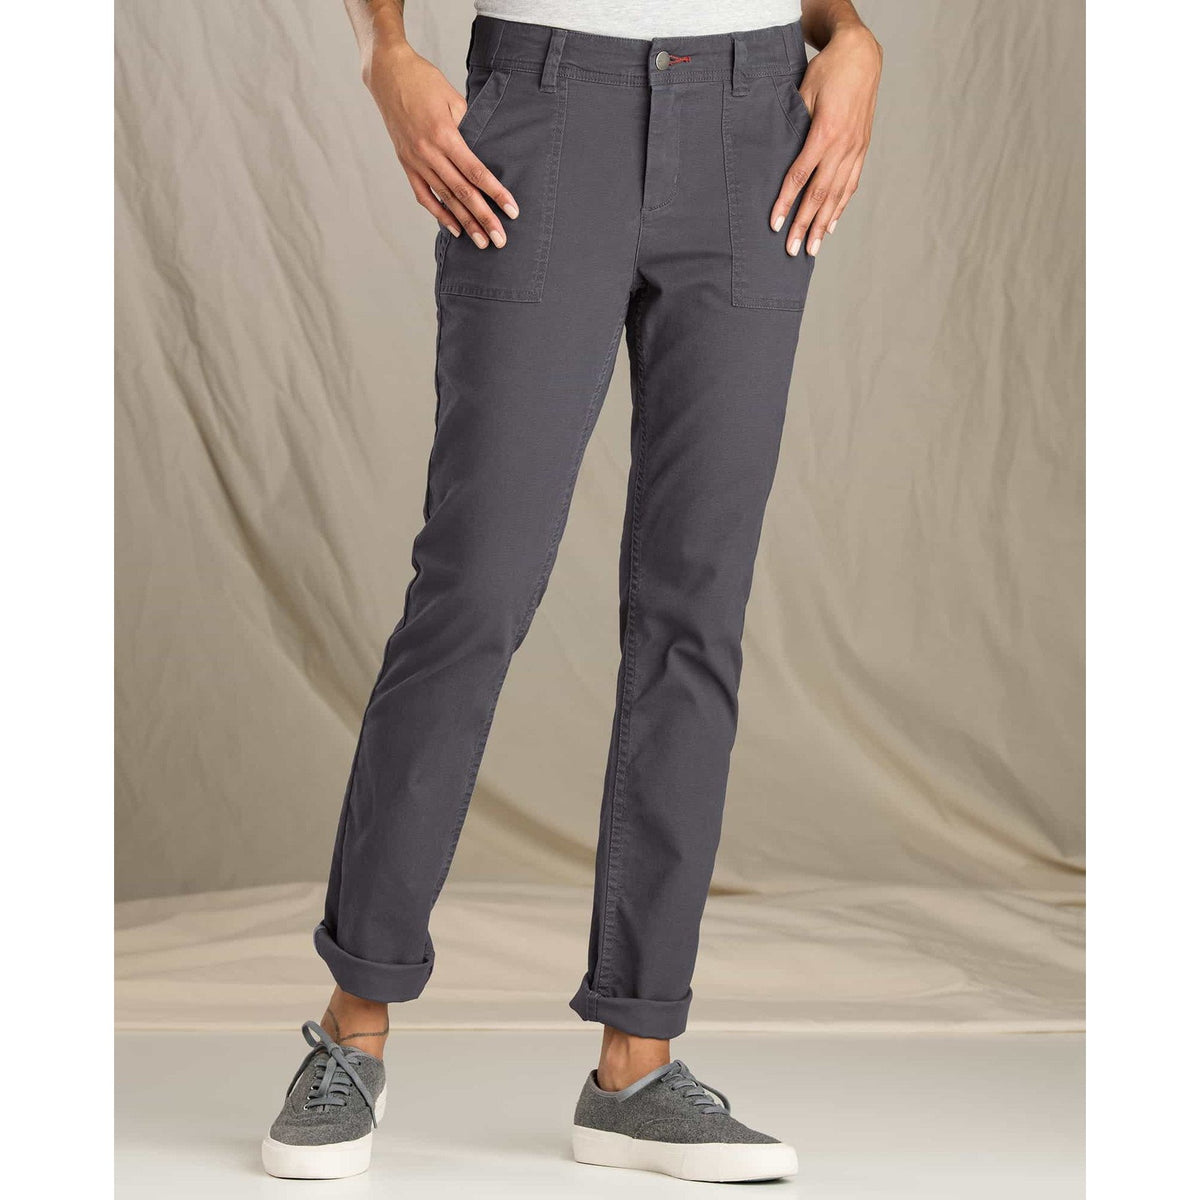 Women's Earthworks Ankle Pant